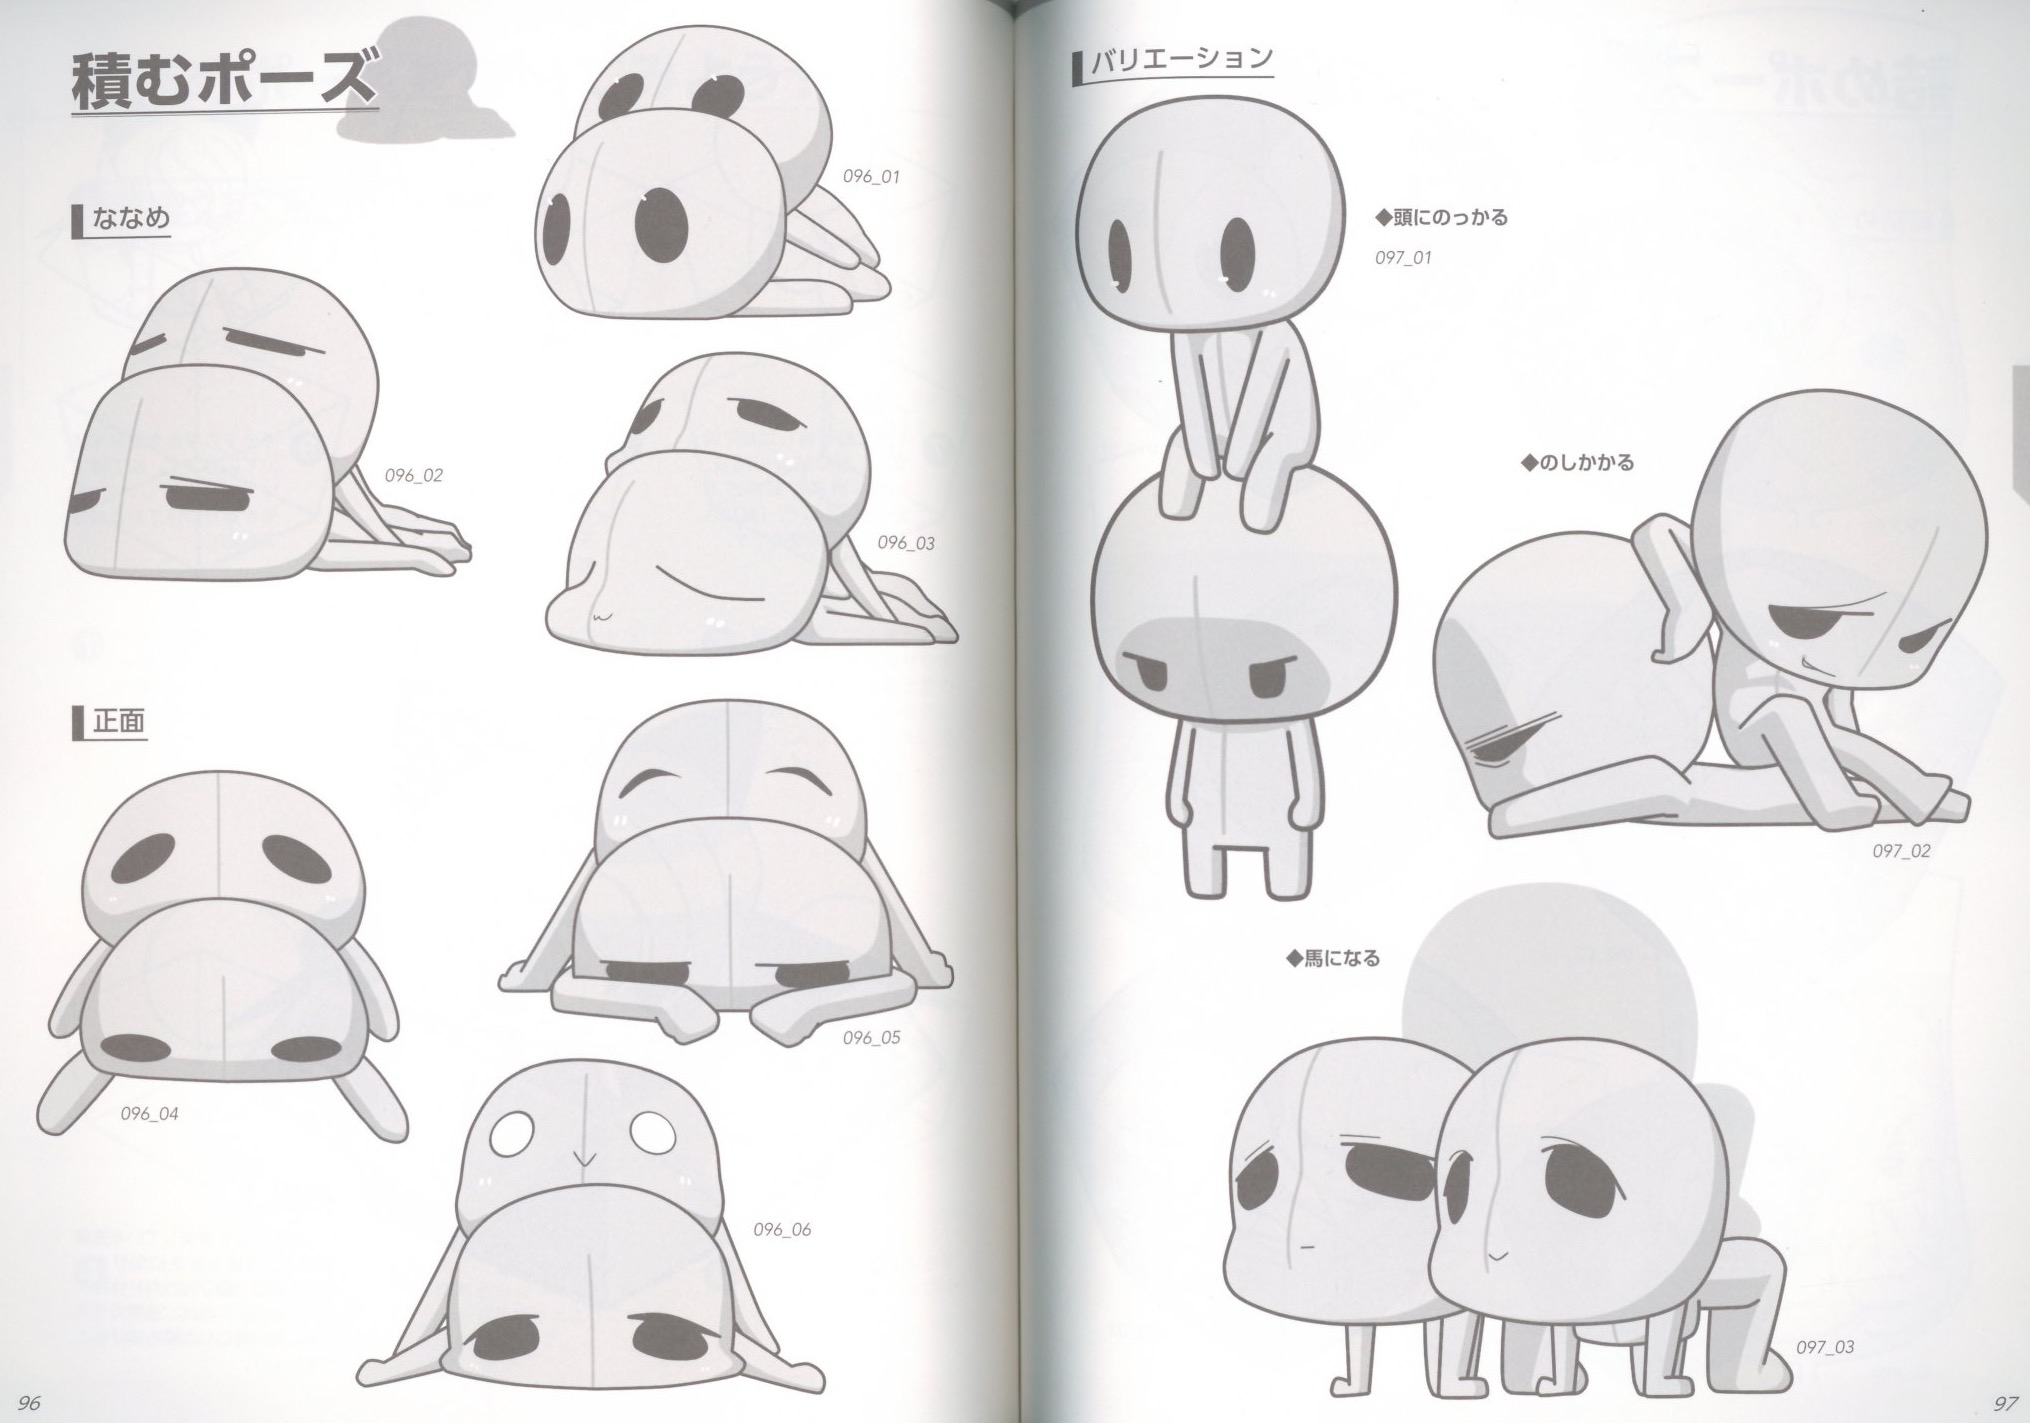 NEW]How to draw Manga Anime Super Deformed Pose Collection character  variations